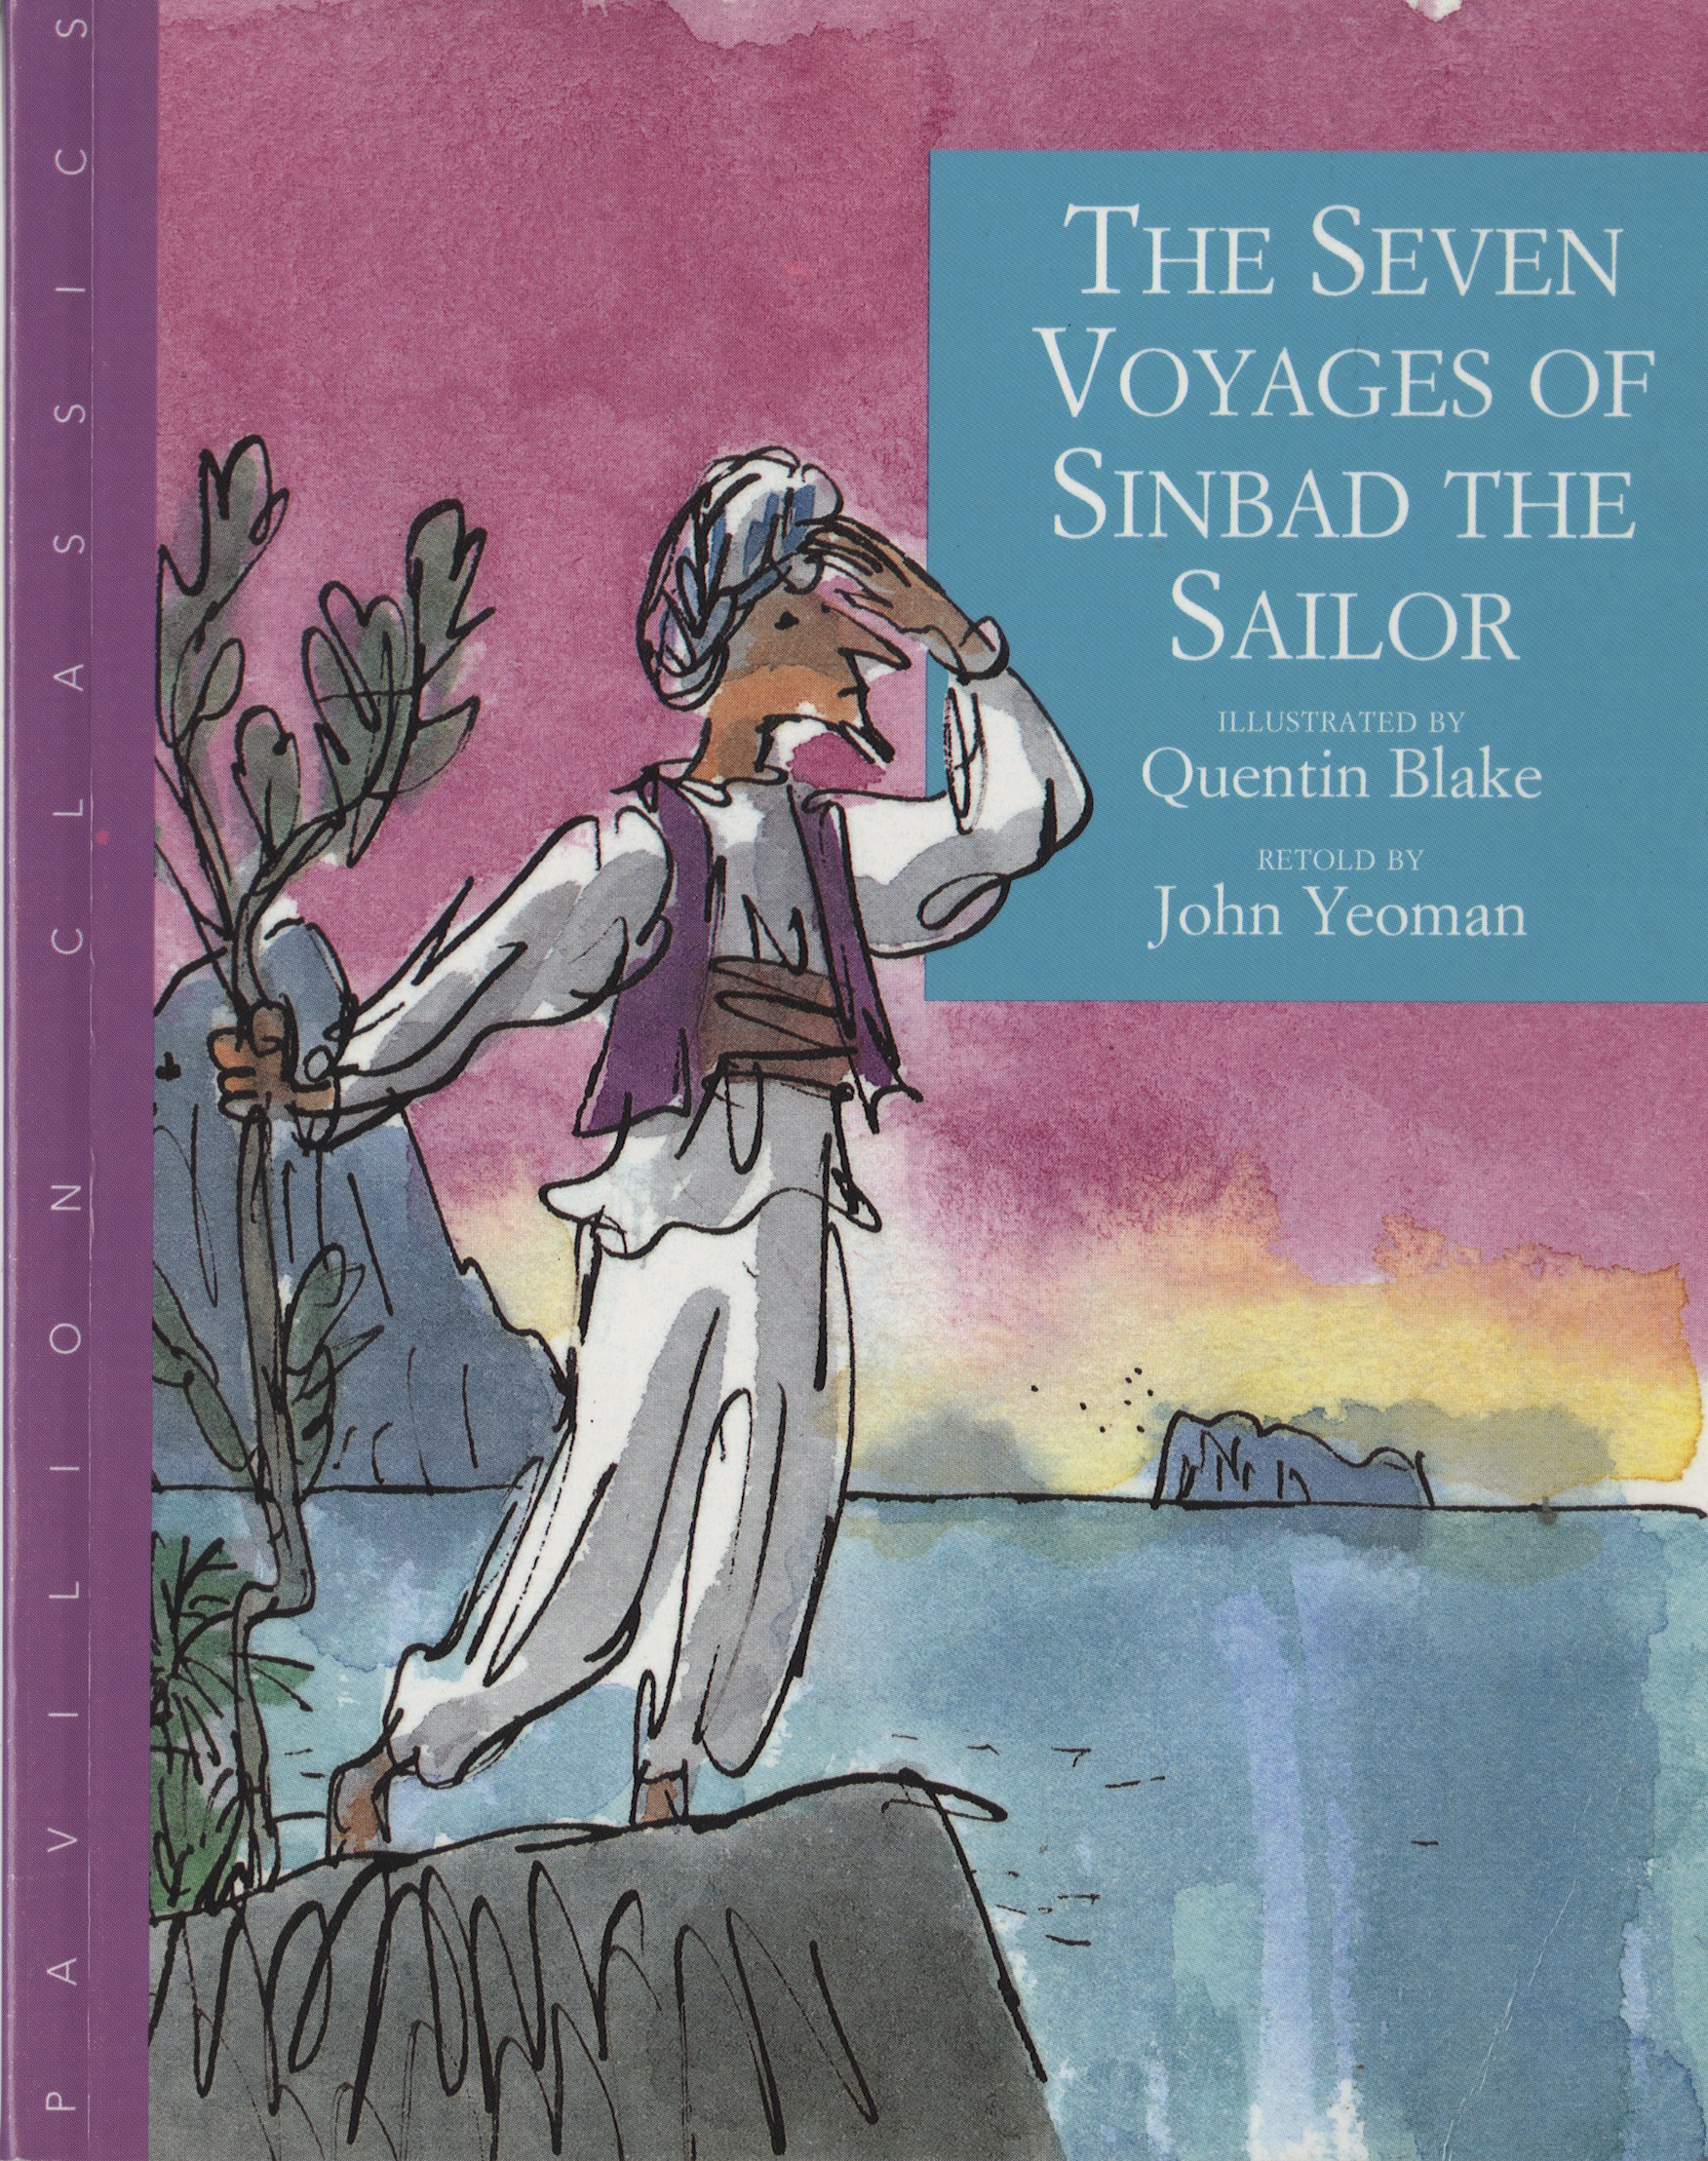 voyages of sinbad the sailor